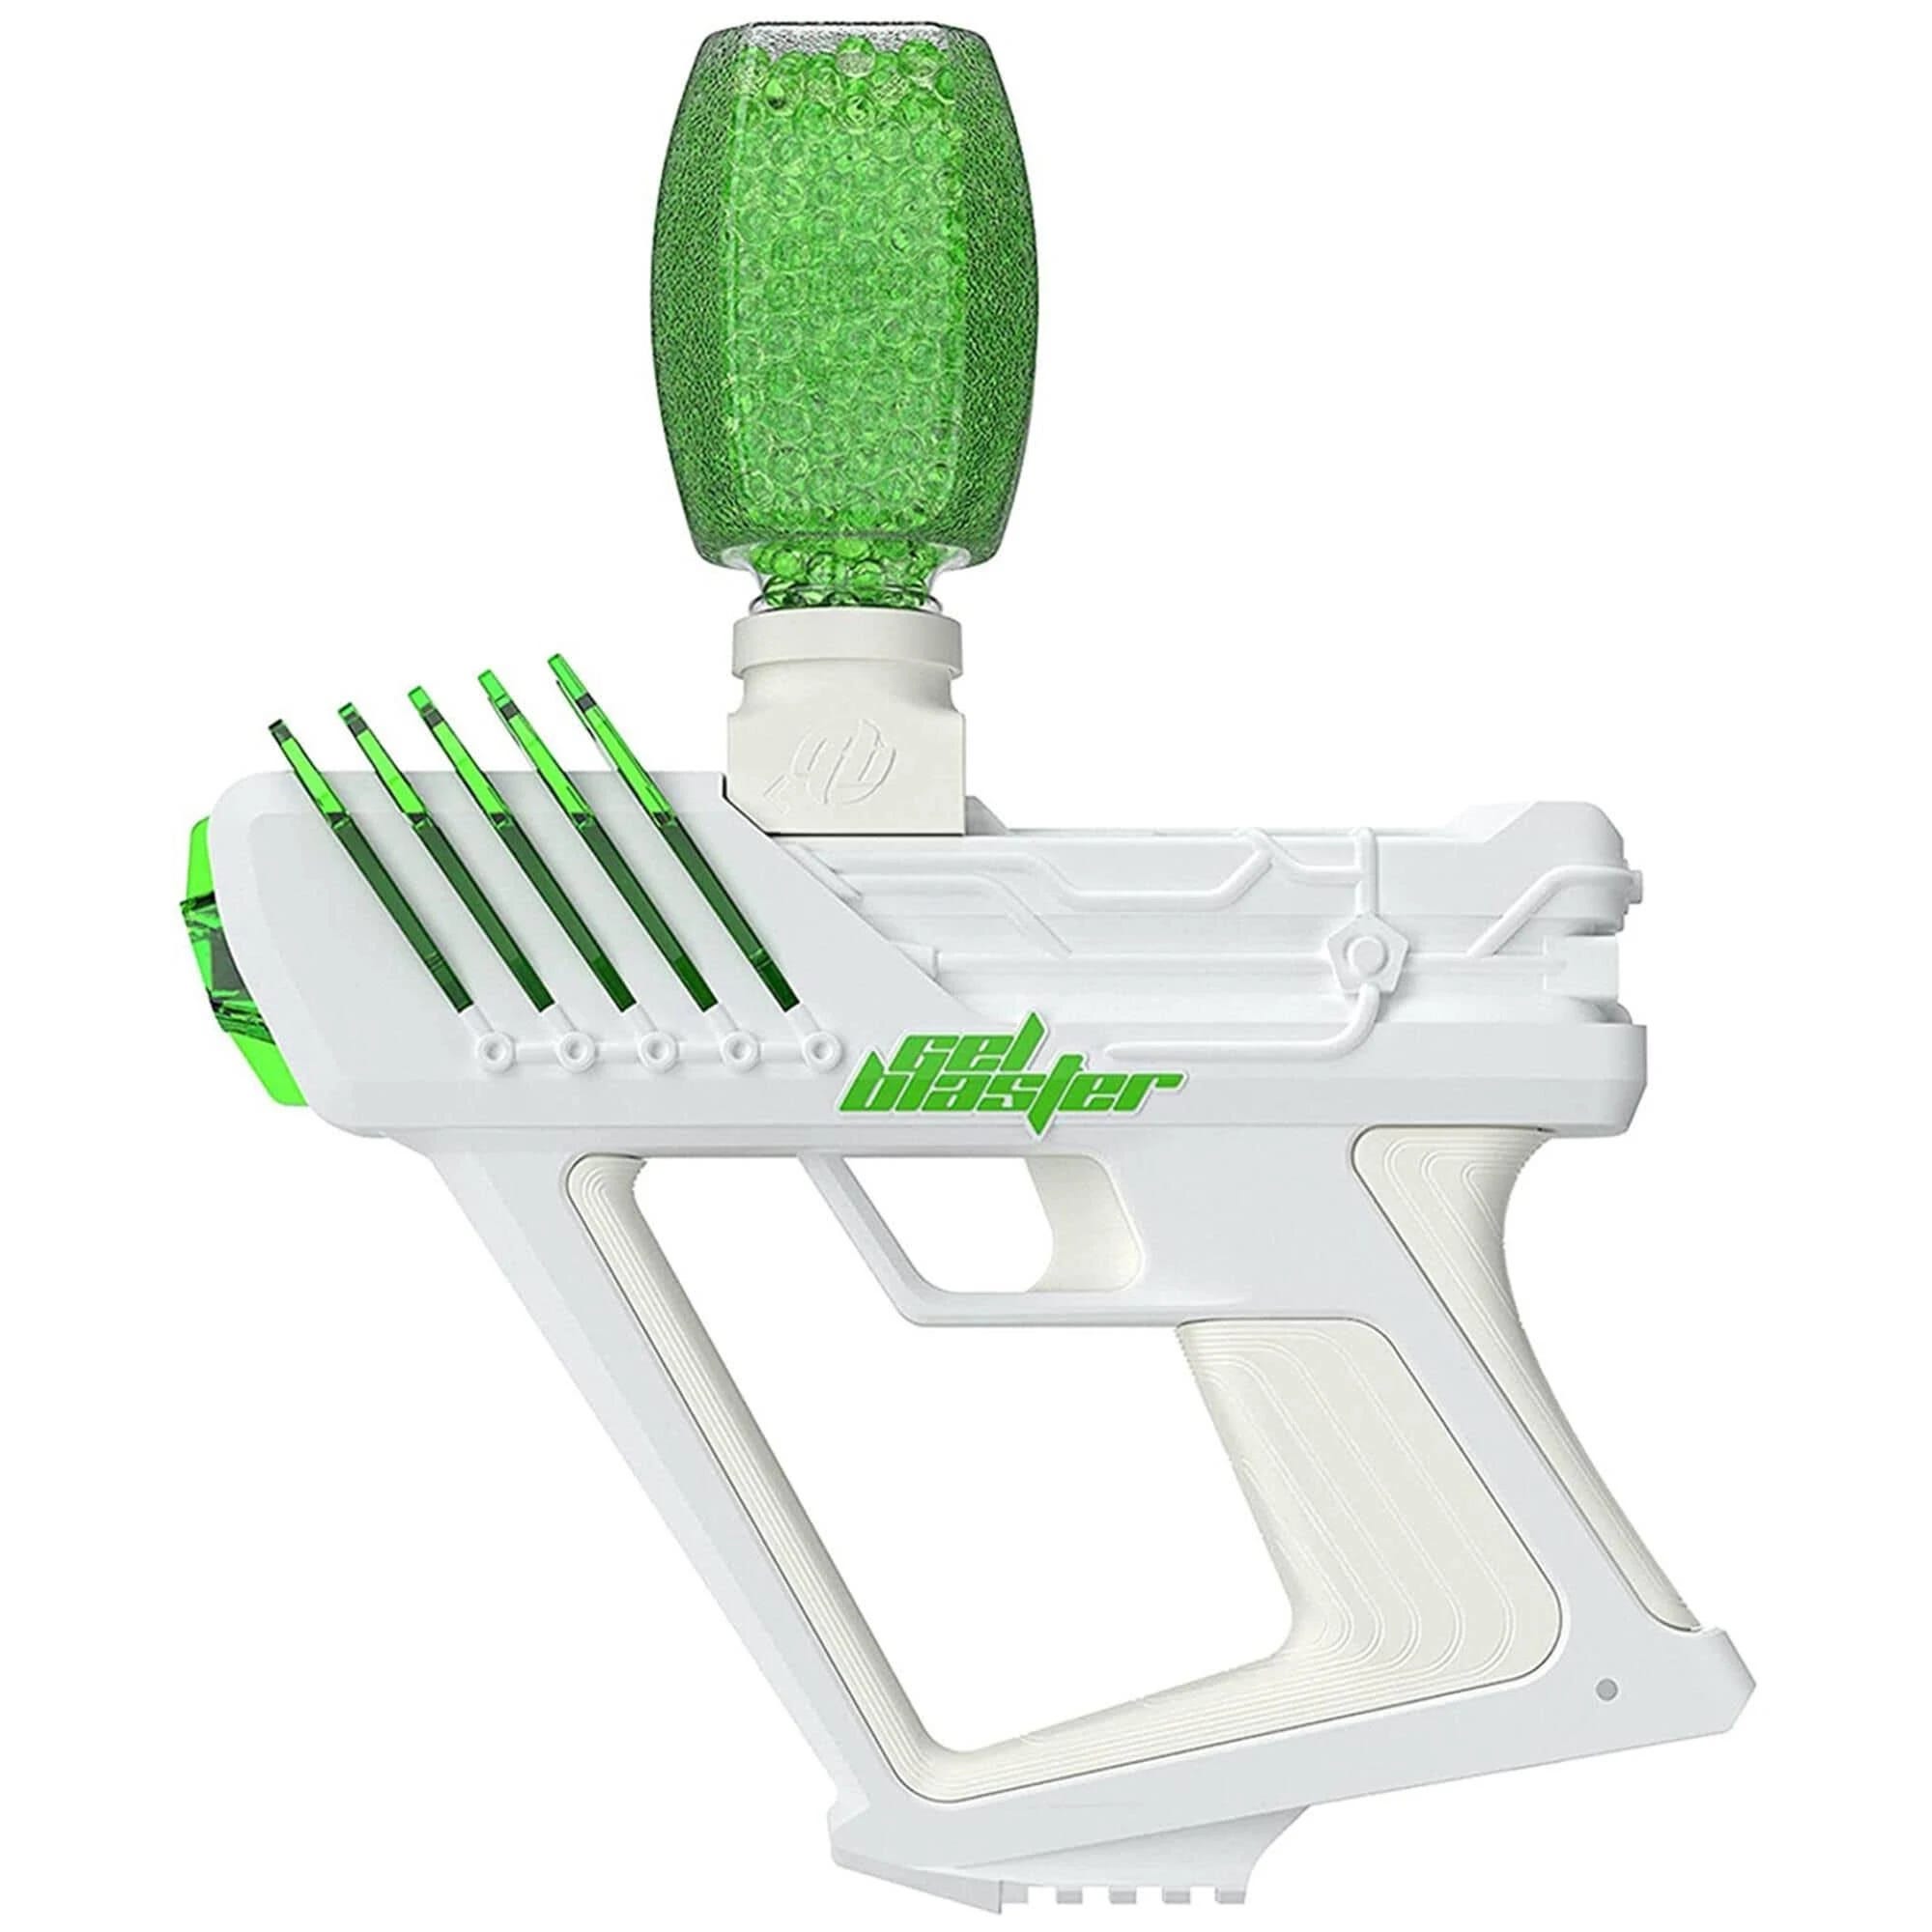 Exciting Gel Blaster Surge Splat Gun for Kids and Adults | Image